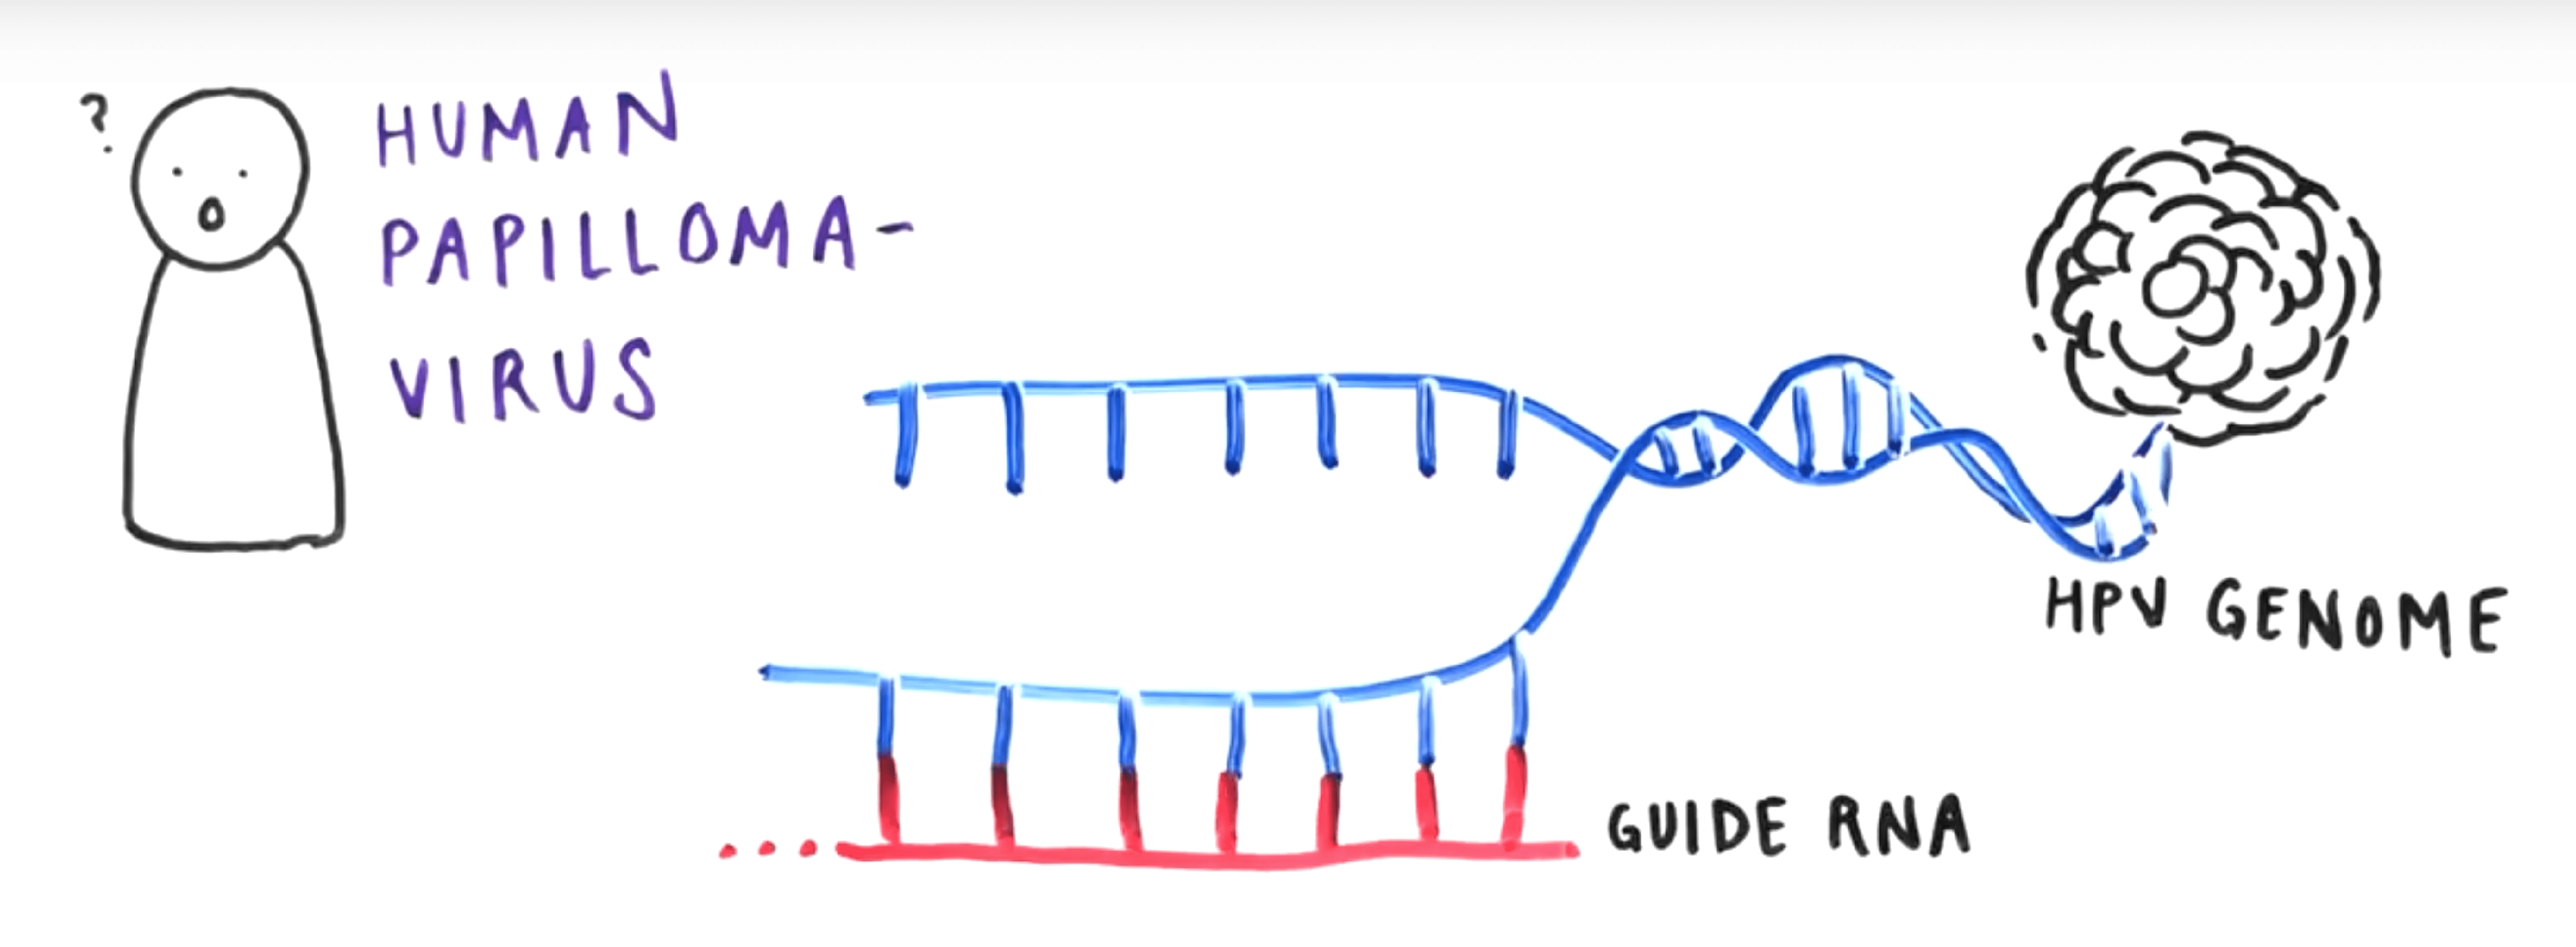 A cartoon showing the DNA coming out of Human Papilloma-Virus